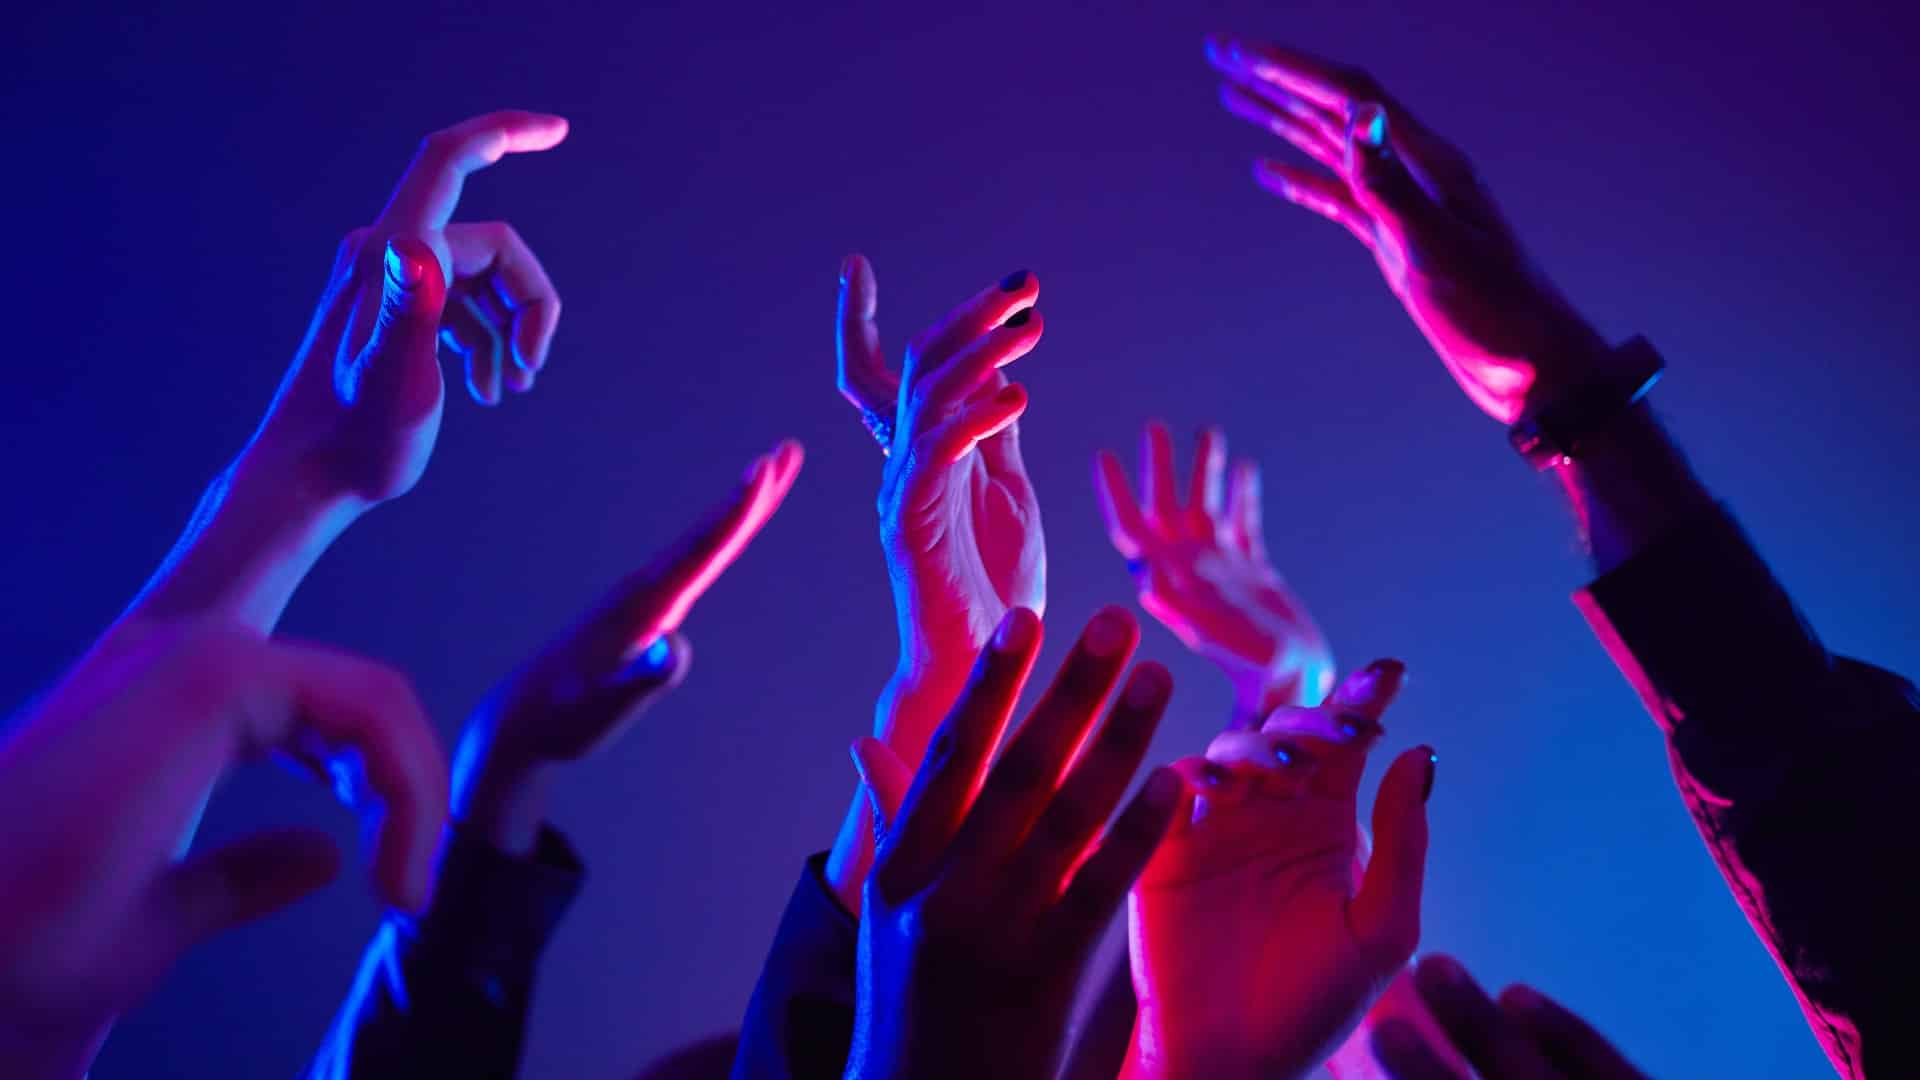 Close up of crowd dancing in club with hands up lit by neon lights, copy space